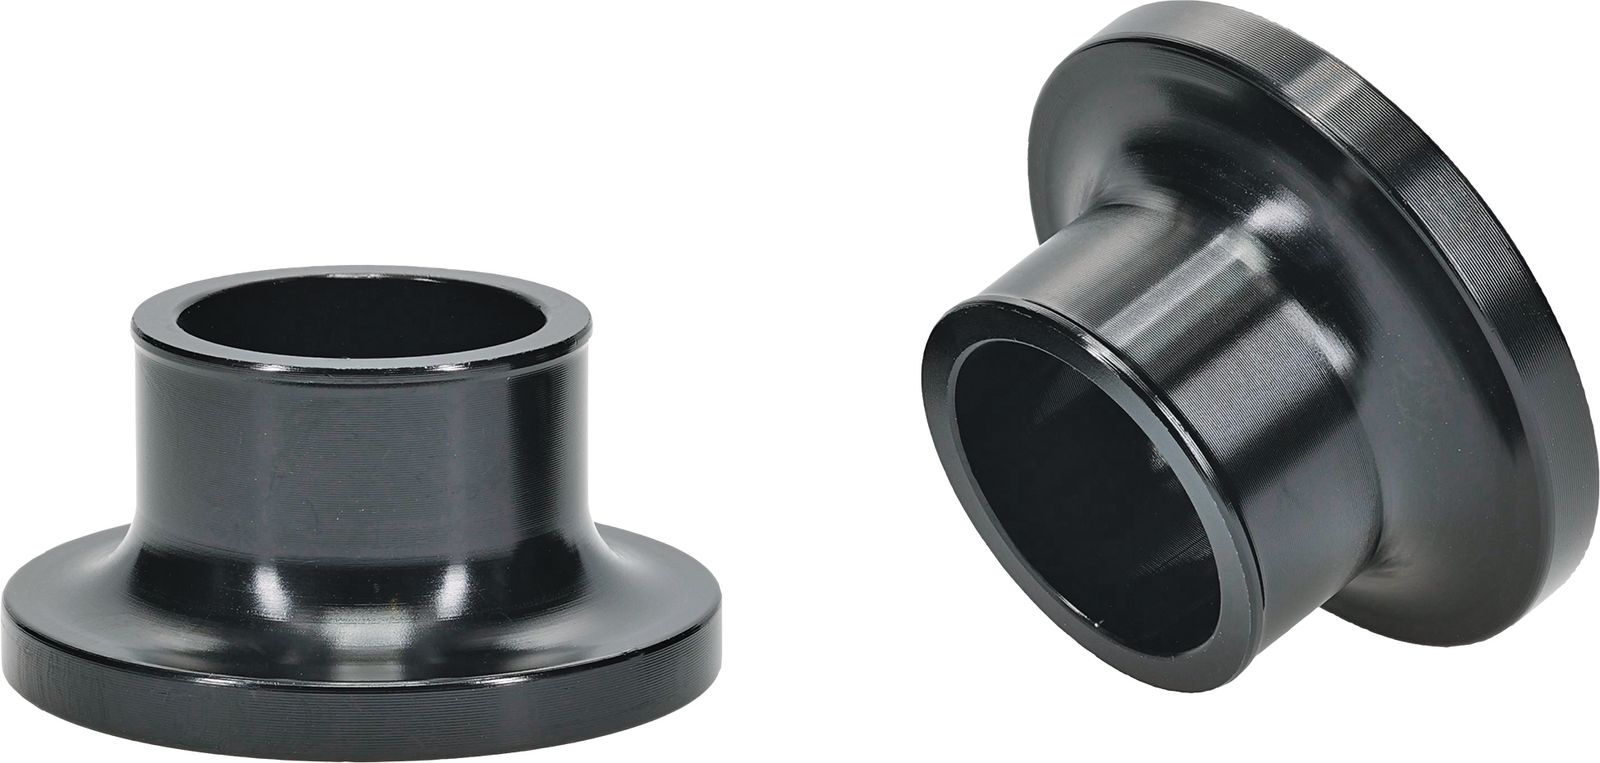 Wrp Rear Wheel Spacer Kits - WRP111040 image